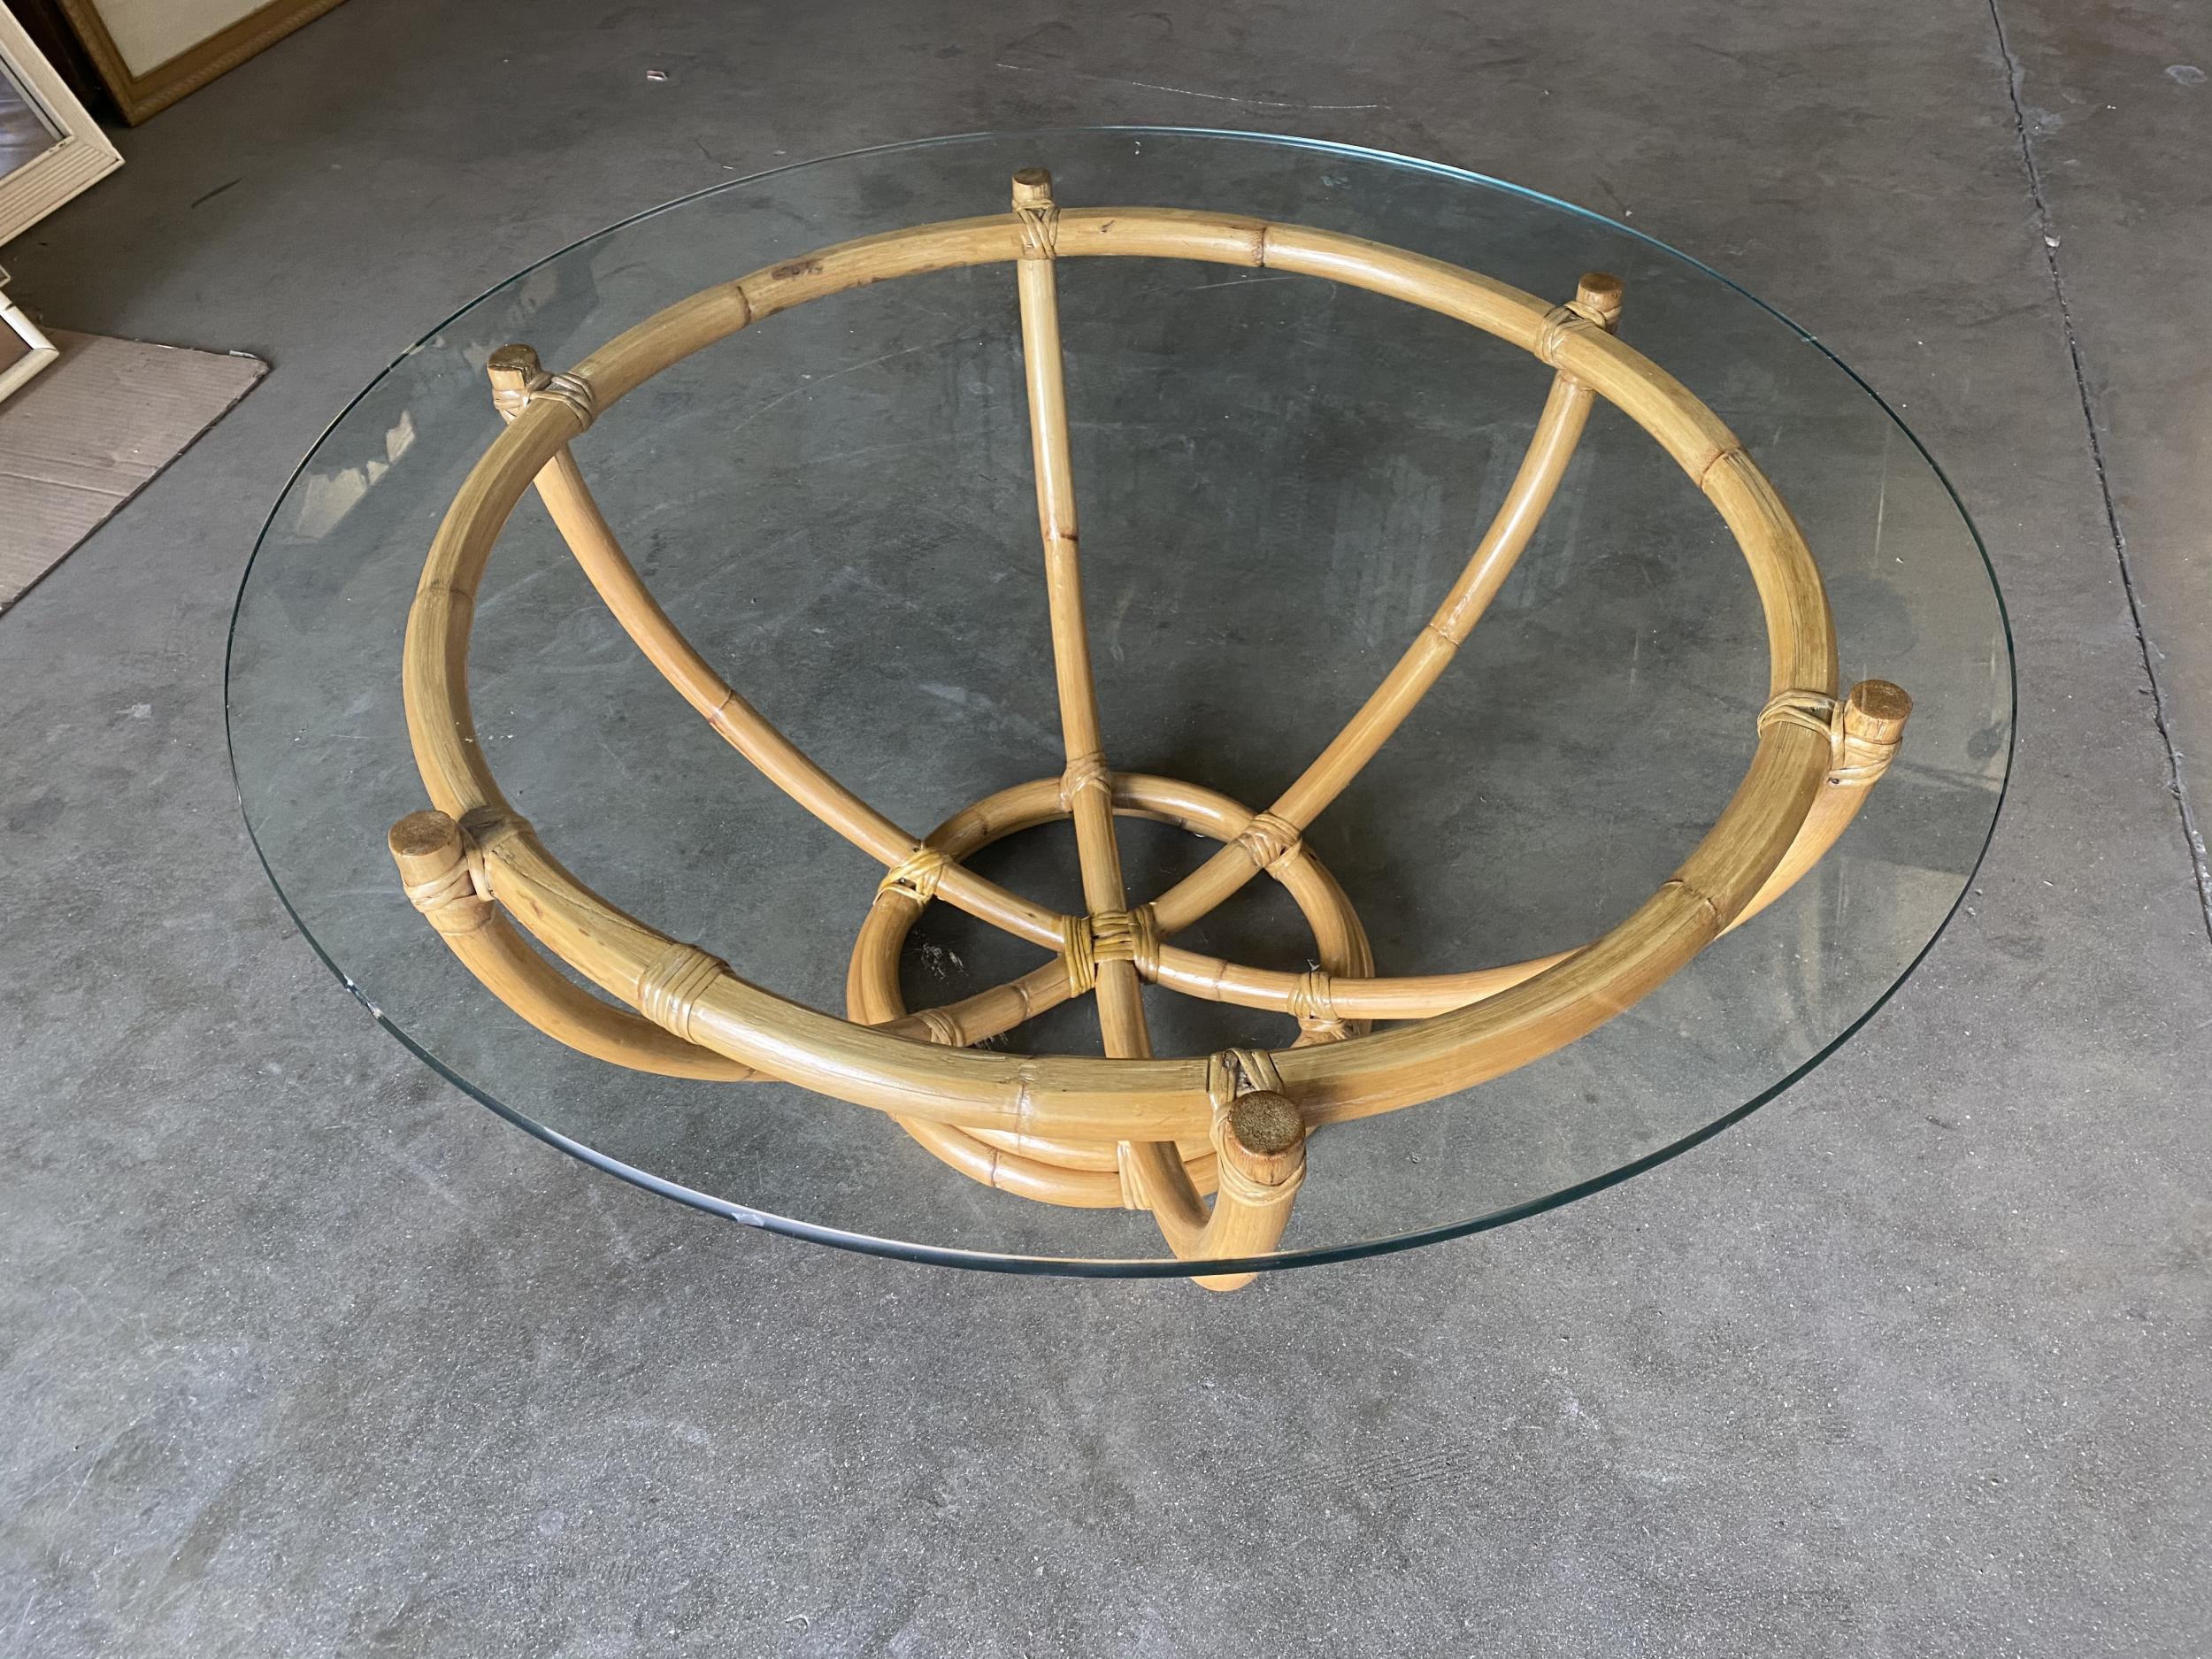 Made circa 1940, this six-pole rattan coffee table has an unusual stacked rattan round base. The six rattan poles organically branch outward to a circular top made of a single piece of bent rattan. The glass top rests atop the poles, exuding an